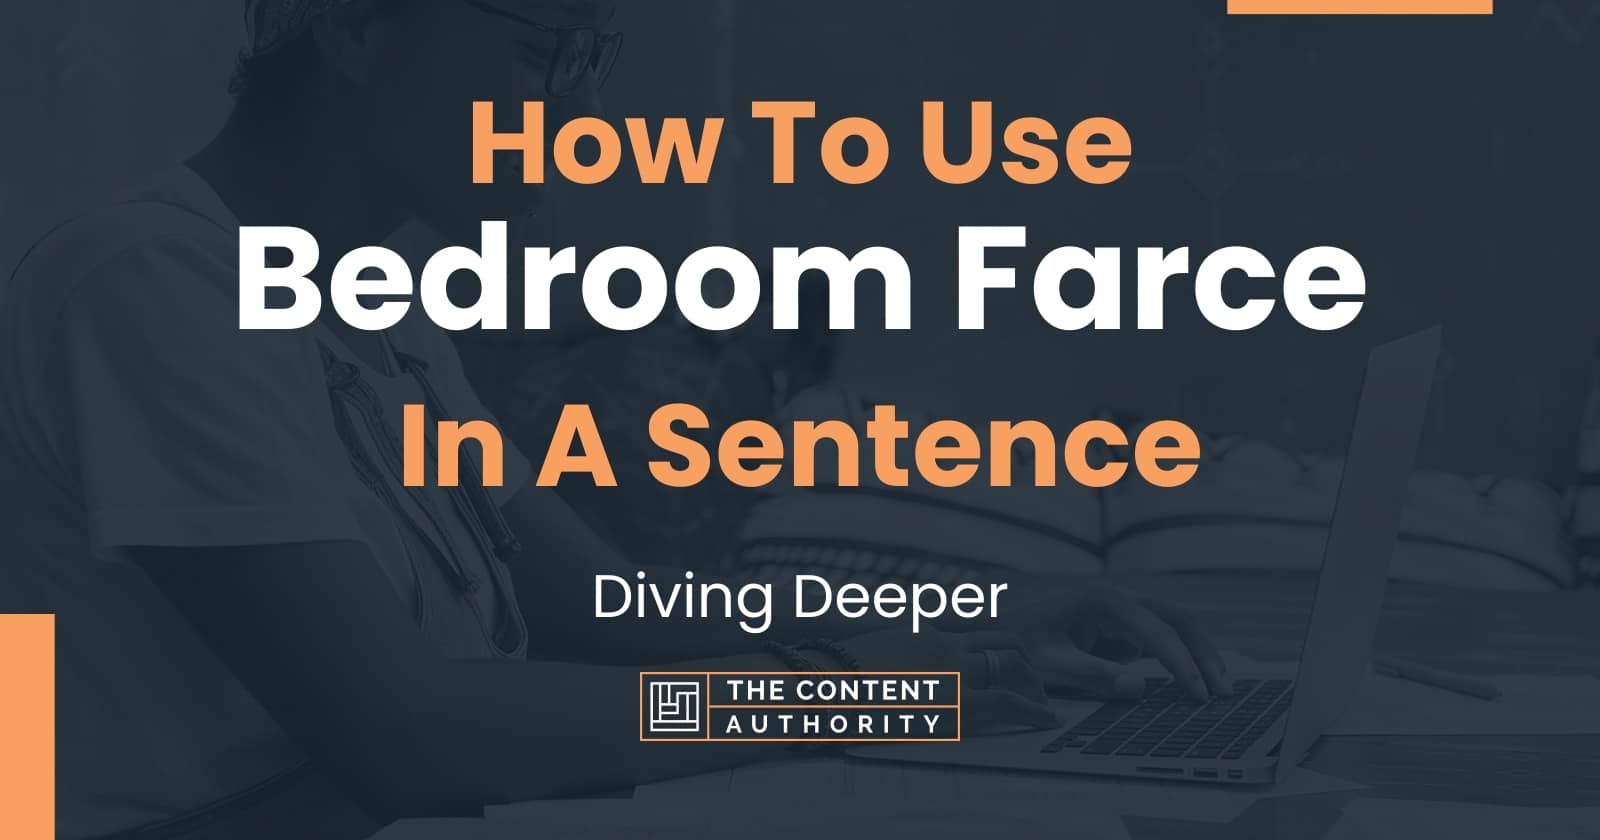 How To Use Bedroom Farce In A Sentence Diving Deeper